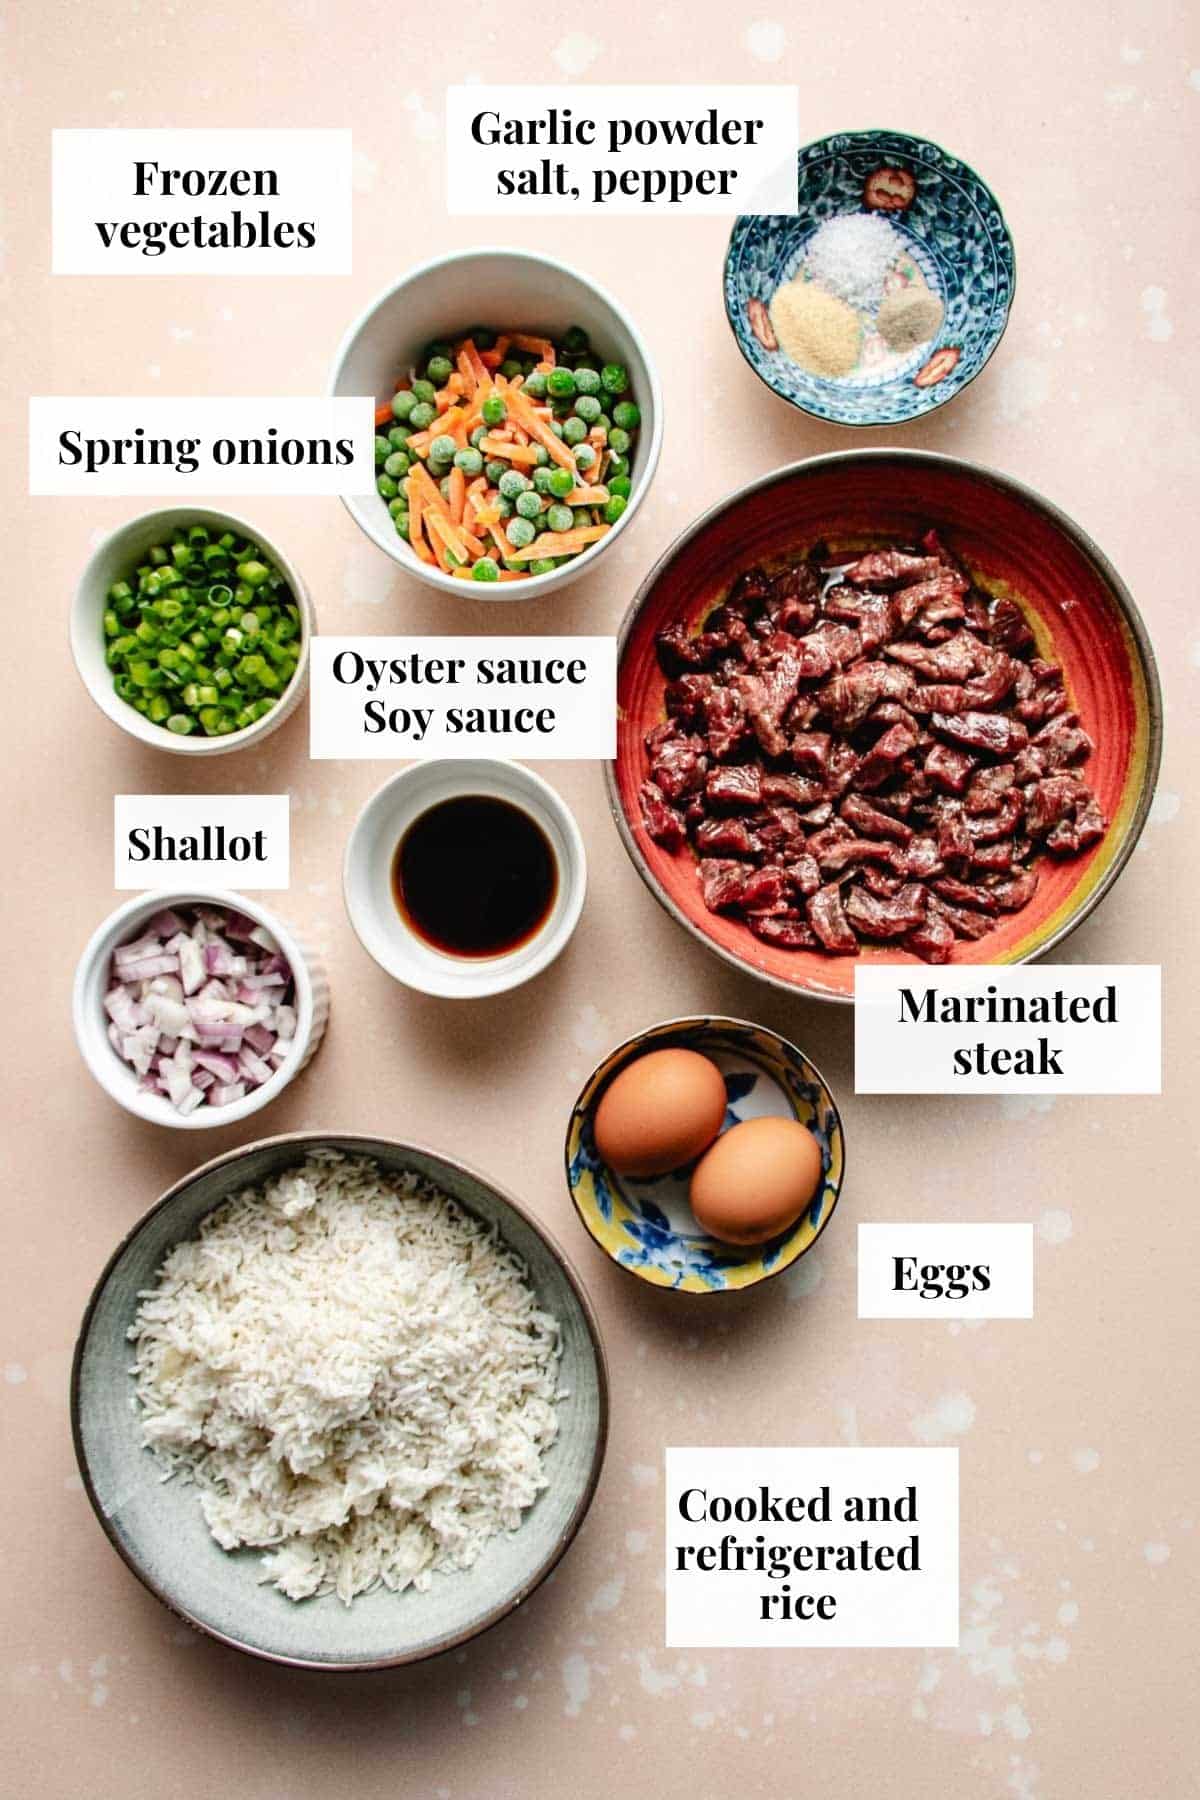 Photo shows ingredients used to make fried rice with steak.